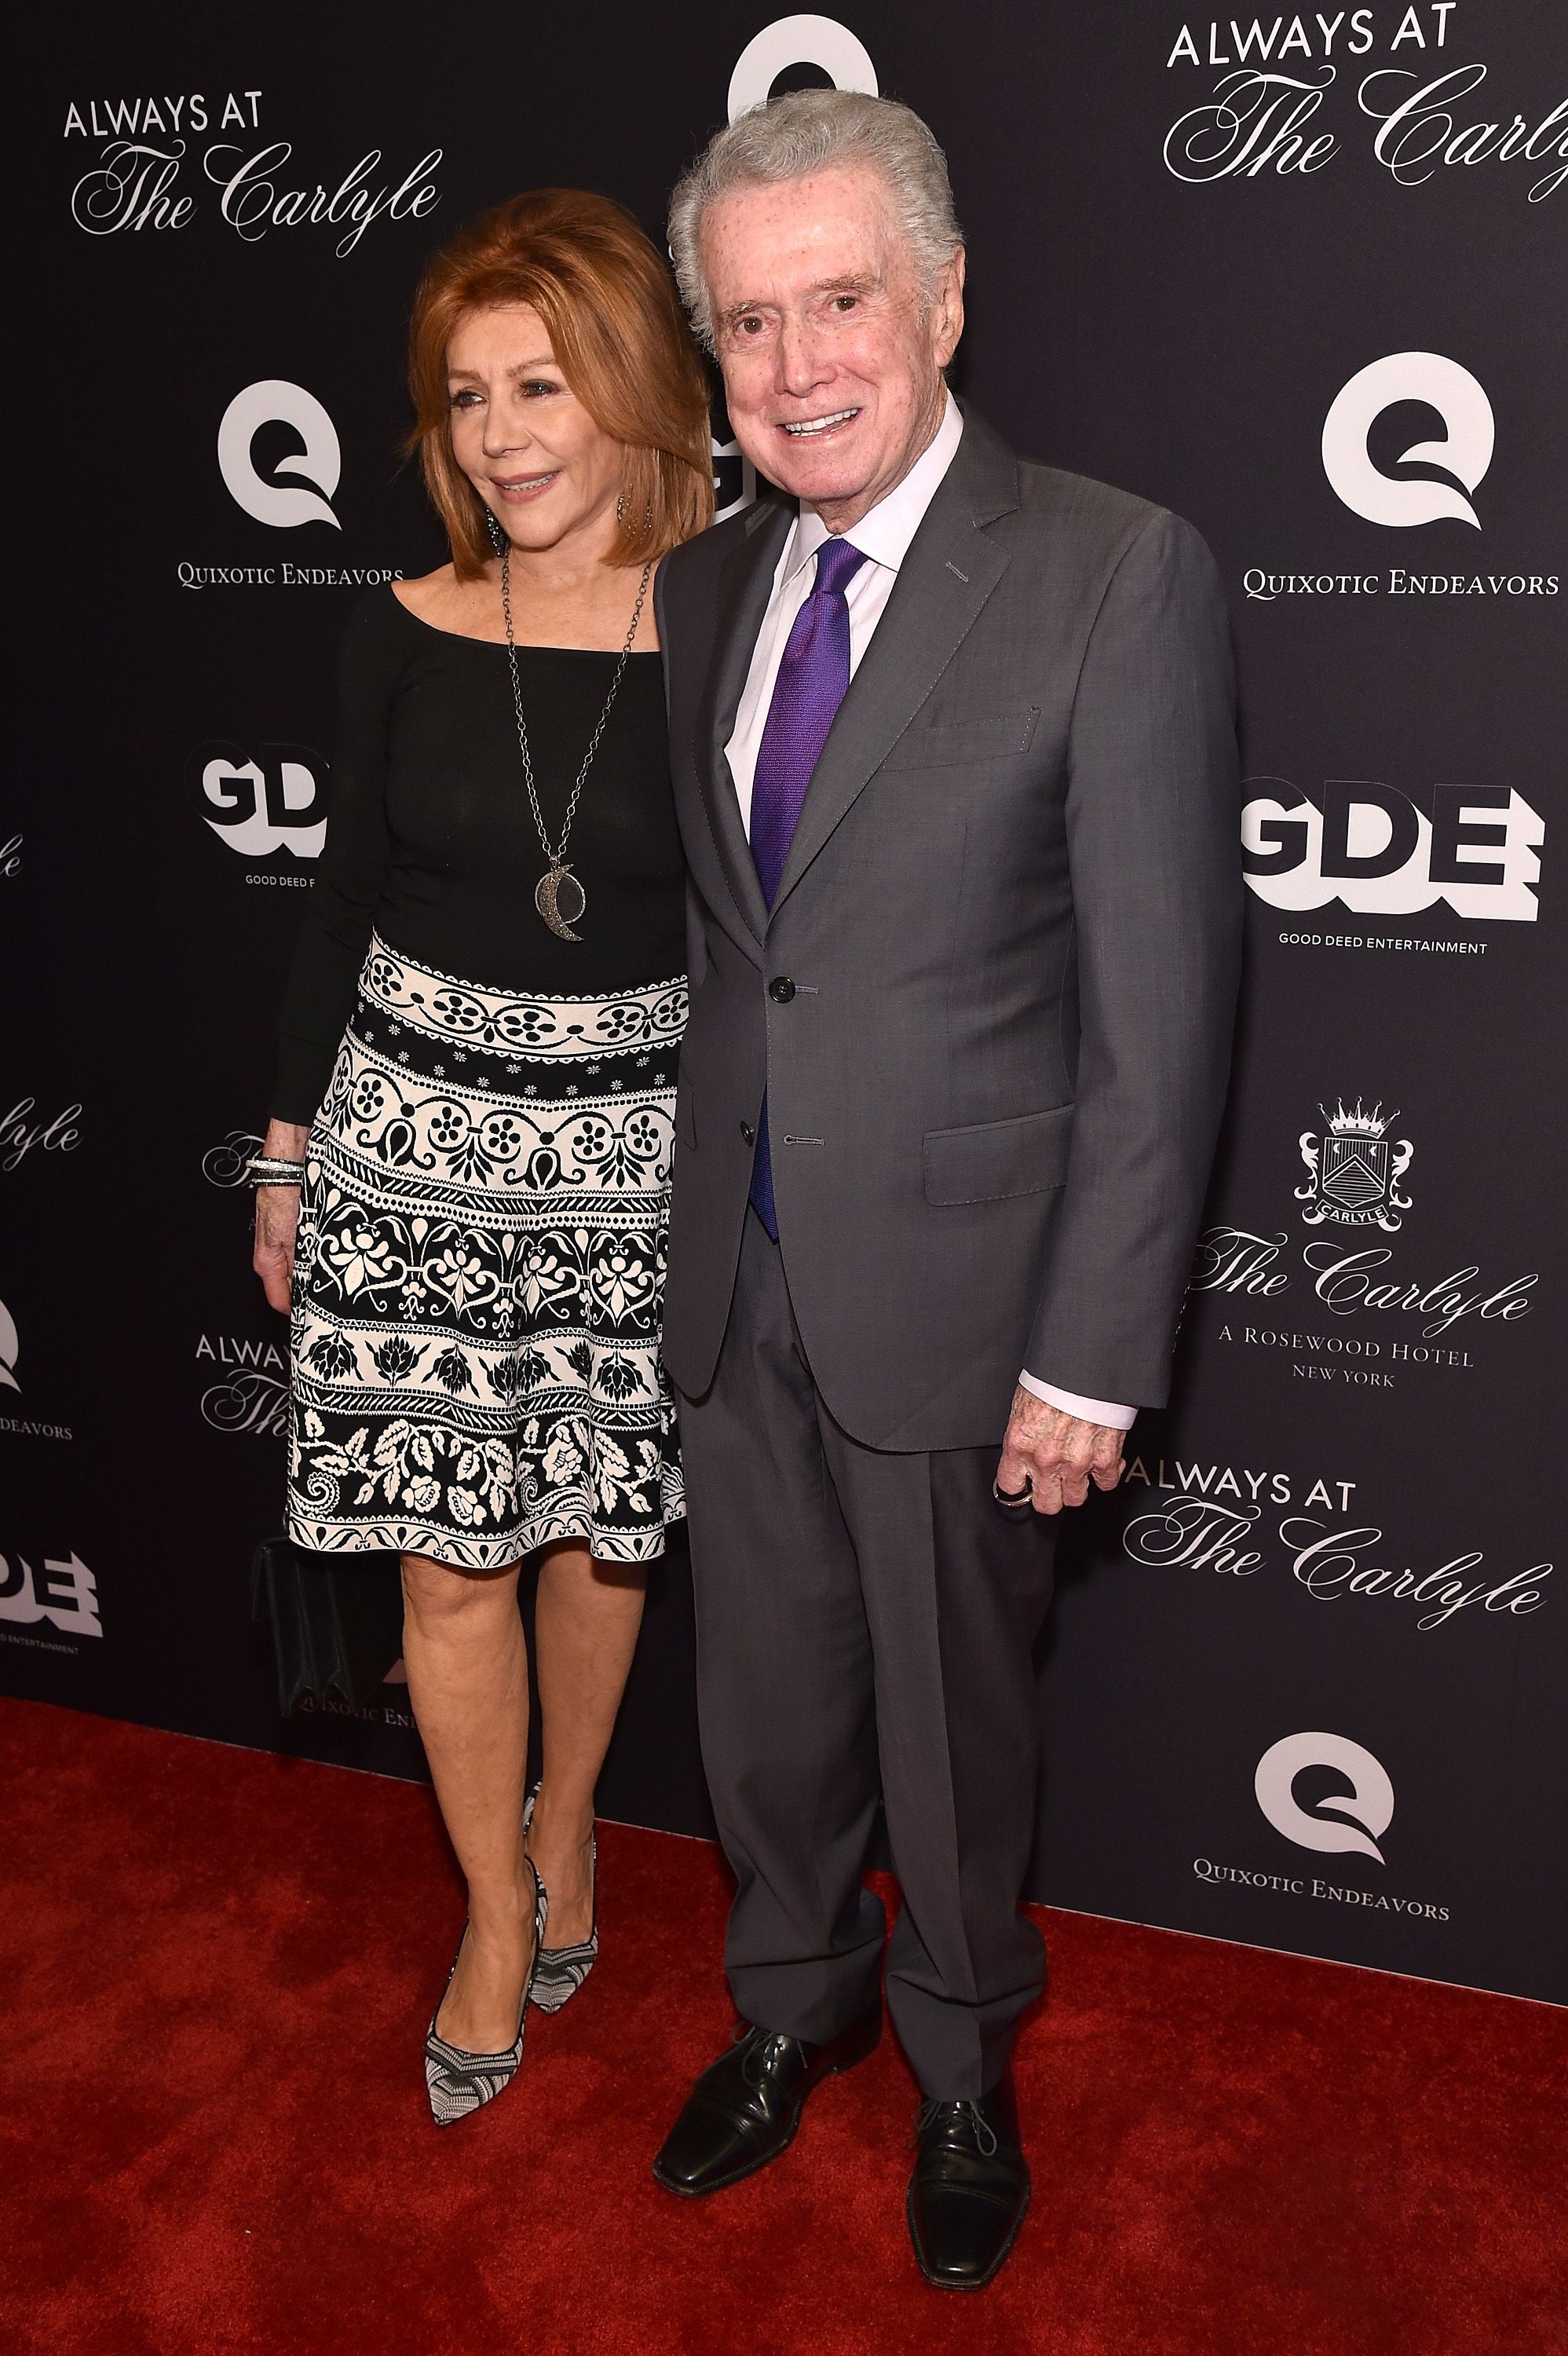 Joy and Regis Philbin at the "Always At The Carlyle" premiere on May 8, 2018, in New York City. | Source: Bryan Bedder/Getty Images